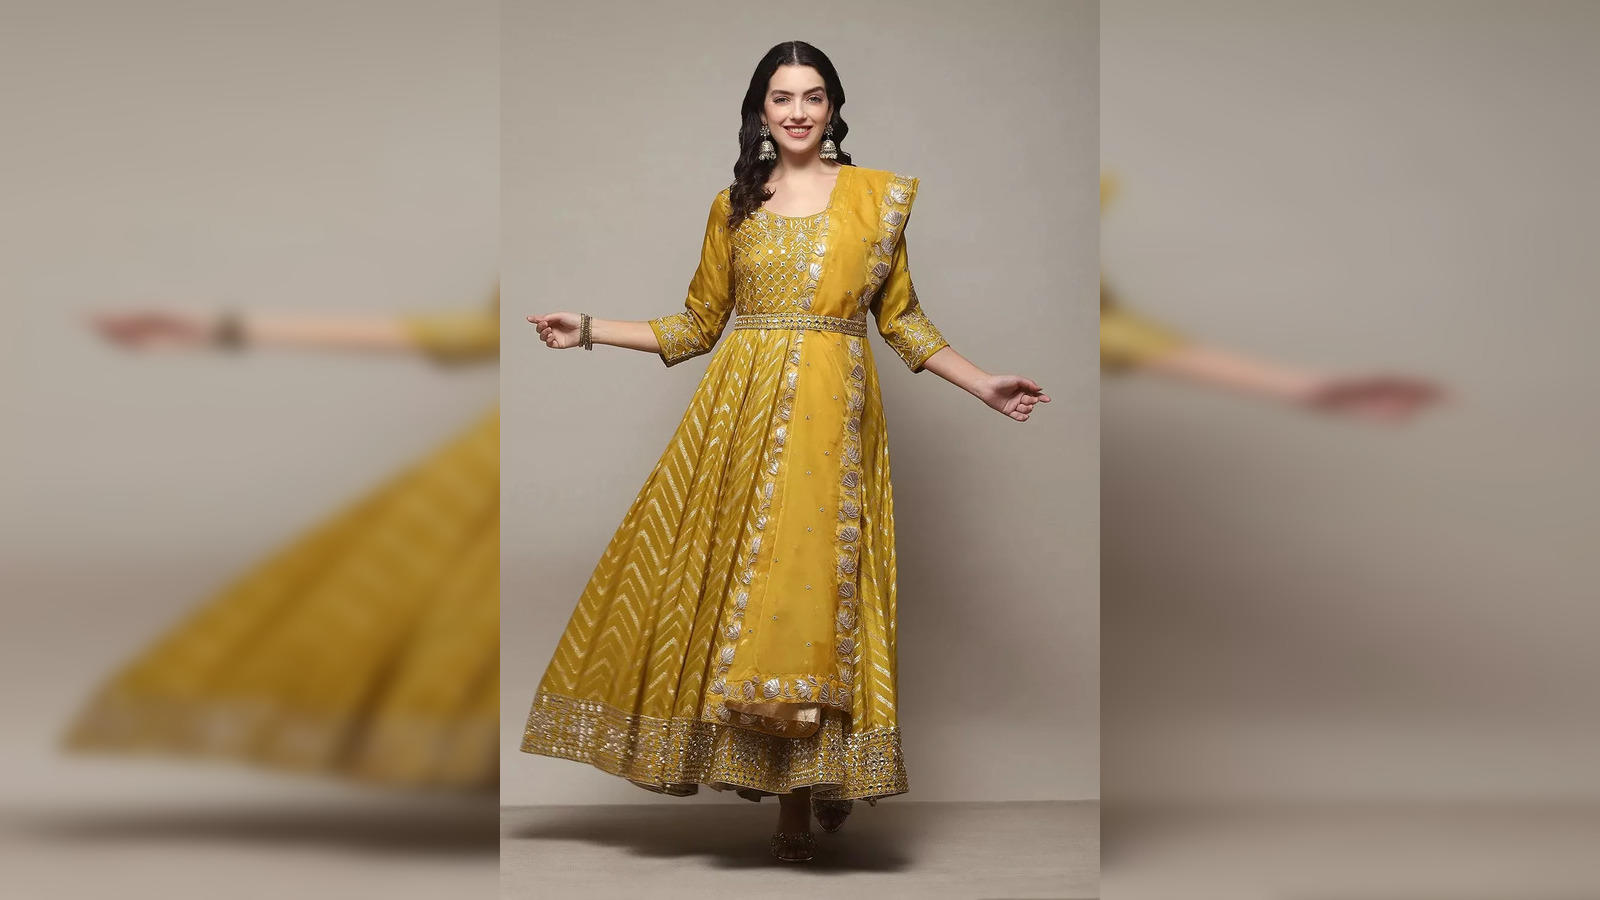 Classy and Chic Ankle Length Salwar Kameez  Indian Clothing, Indian  Dresses and Indian Fashion Trends